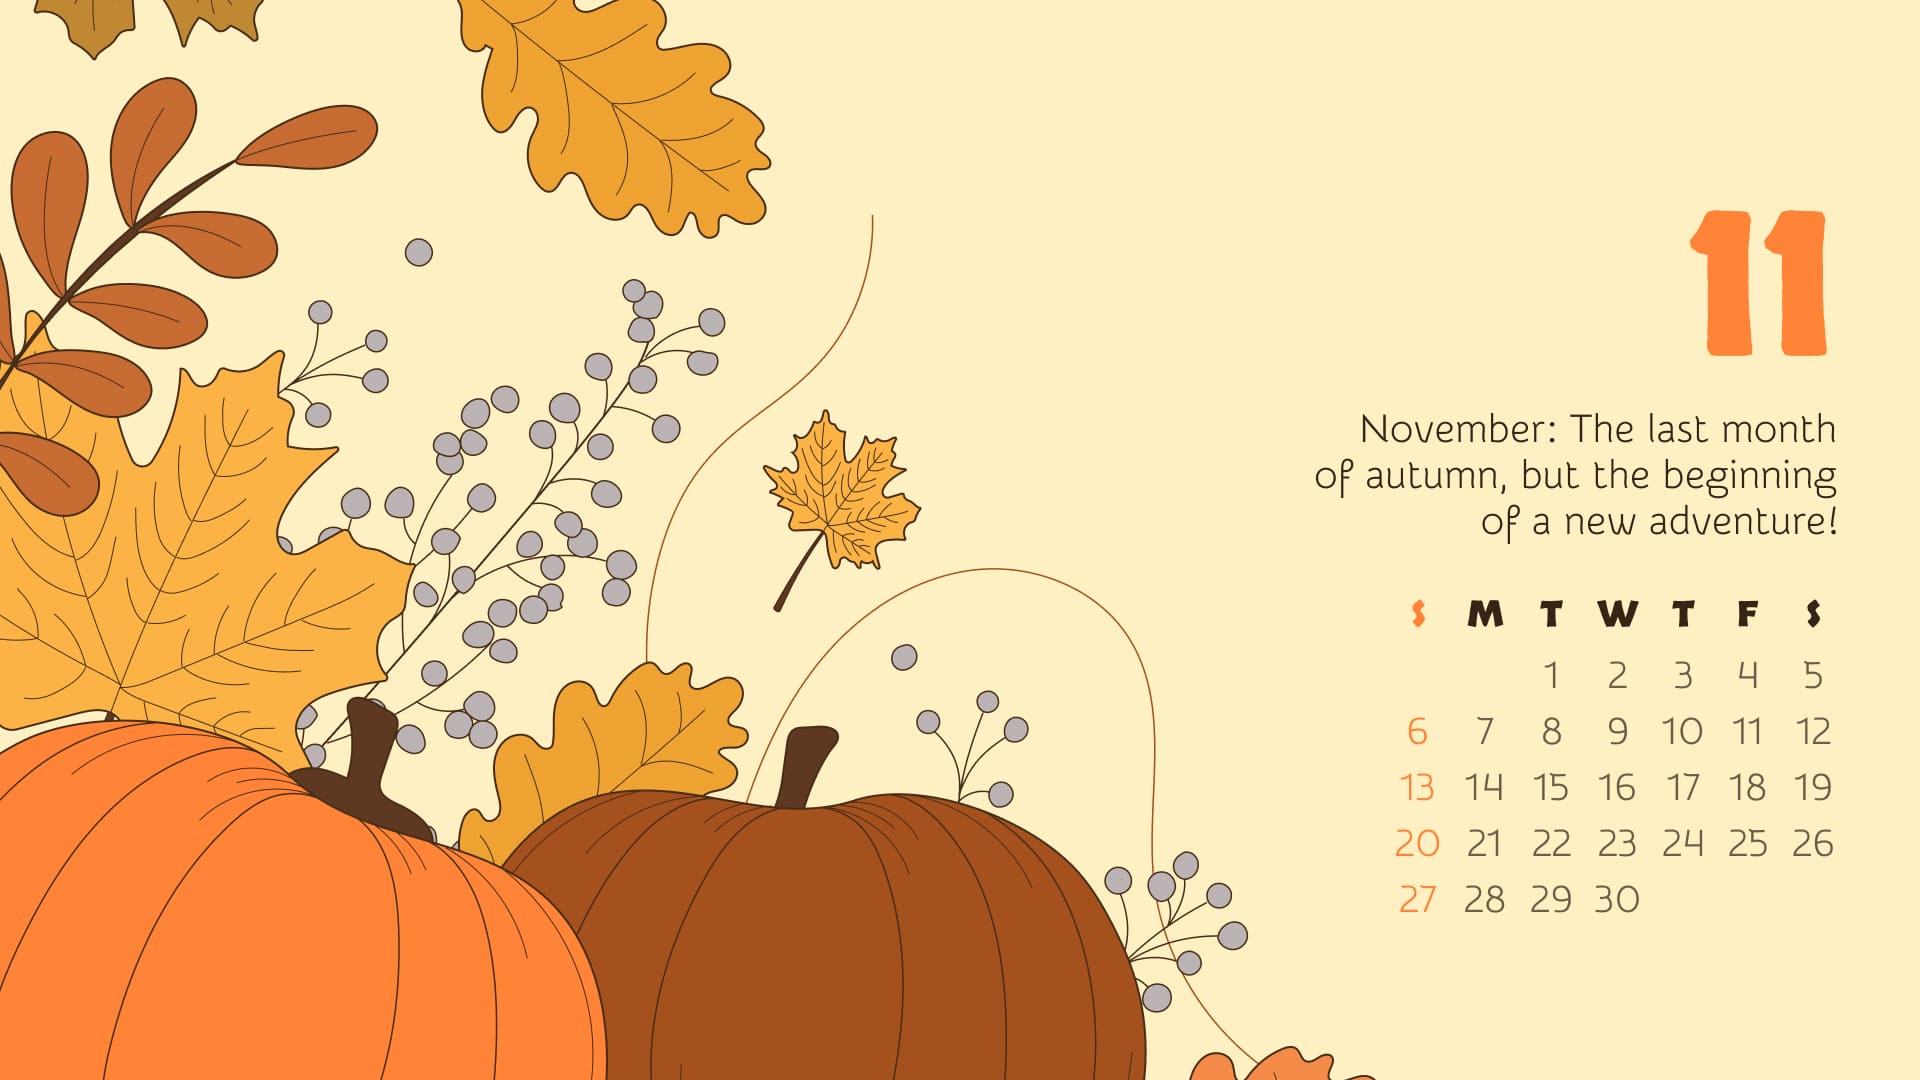 Calendar November in the picture size 1920x1080.